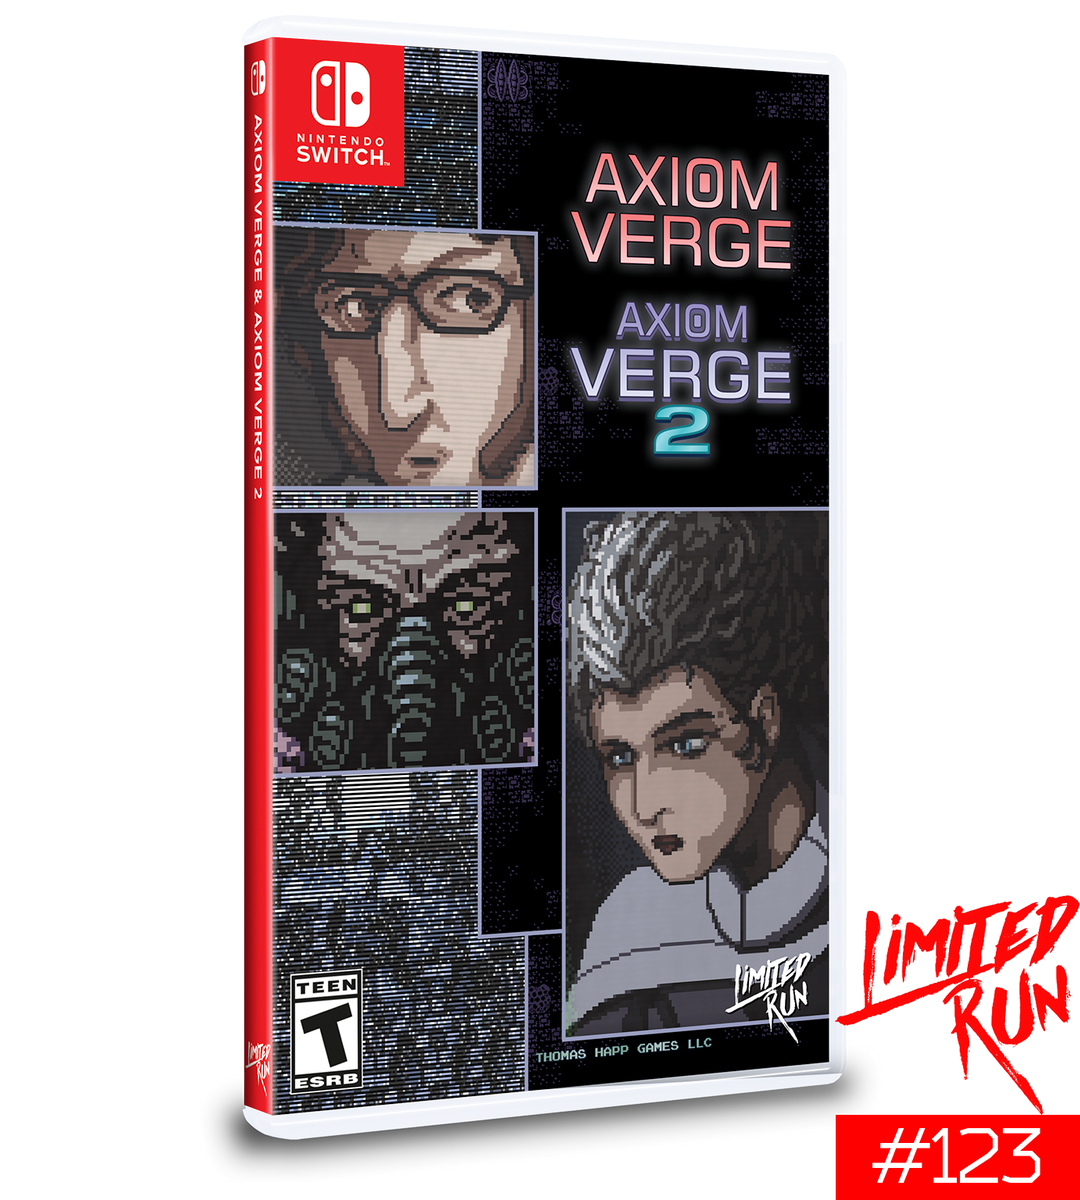 Nintendo Switch gets 7 new indies: Axiom Verge 2, Slime Rancher, and more -  Polygon